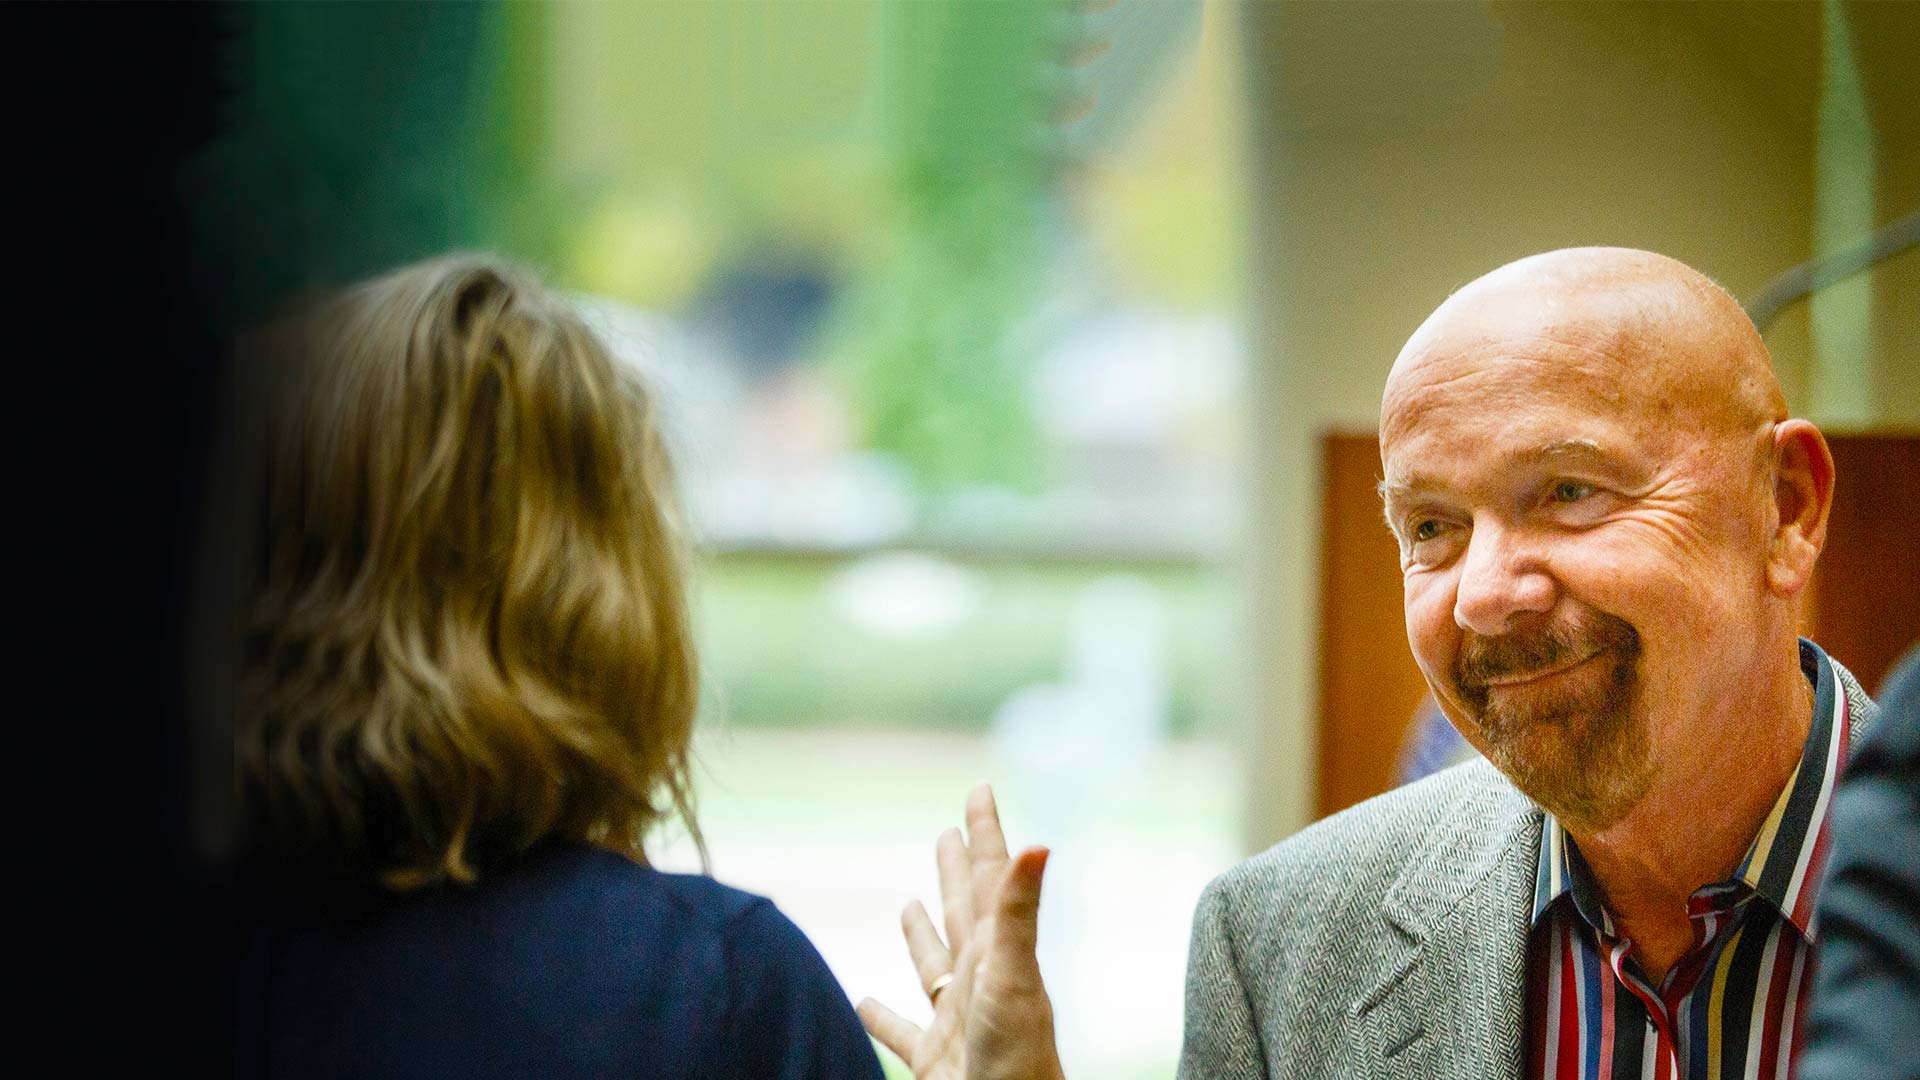 Trustee Richard (Dick) Schulze talks with guests during a reception.